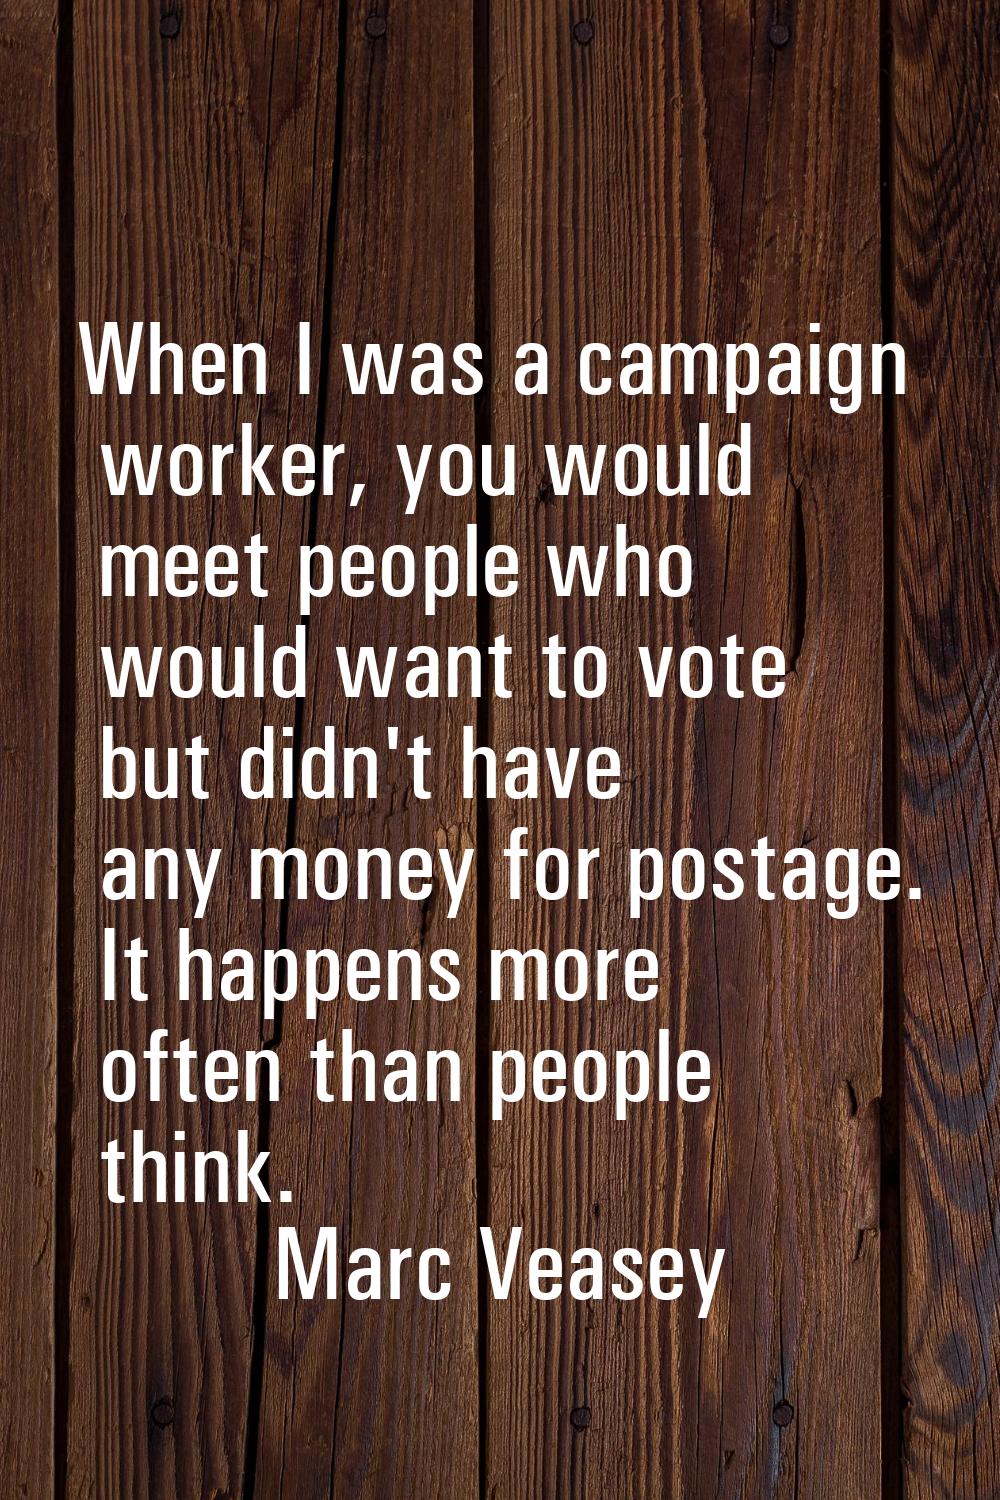 When I was a campaign worker, you would meet people who would want to vote but didn't have any mone